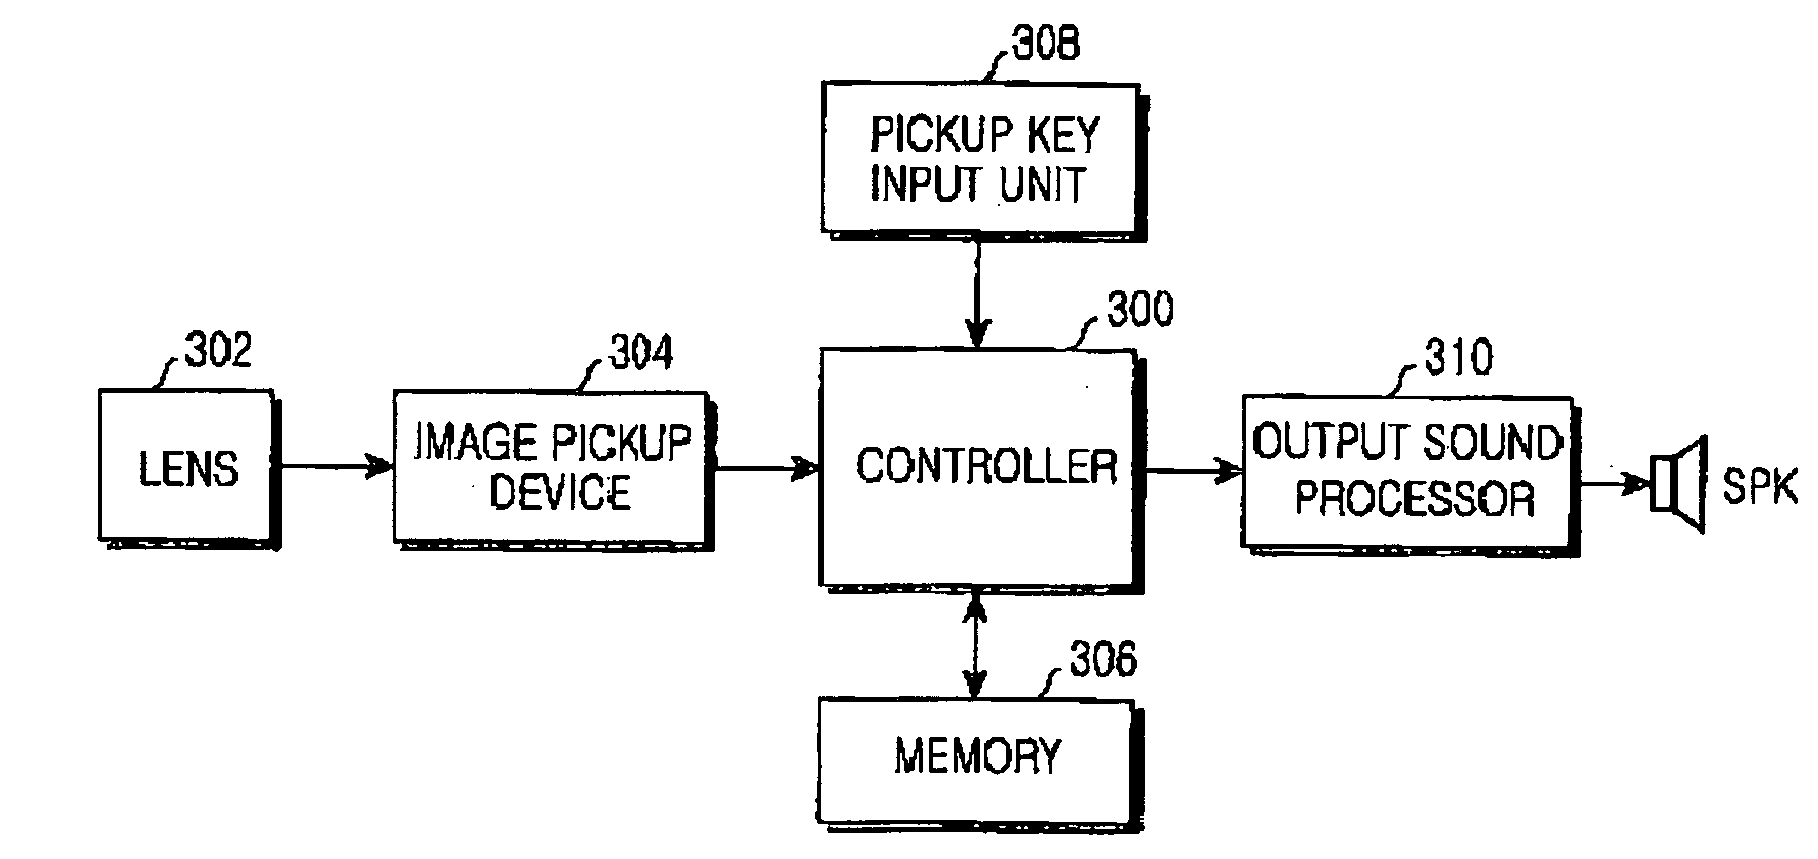 Apparatus and method for controlling output sound of a digital camera